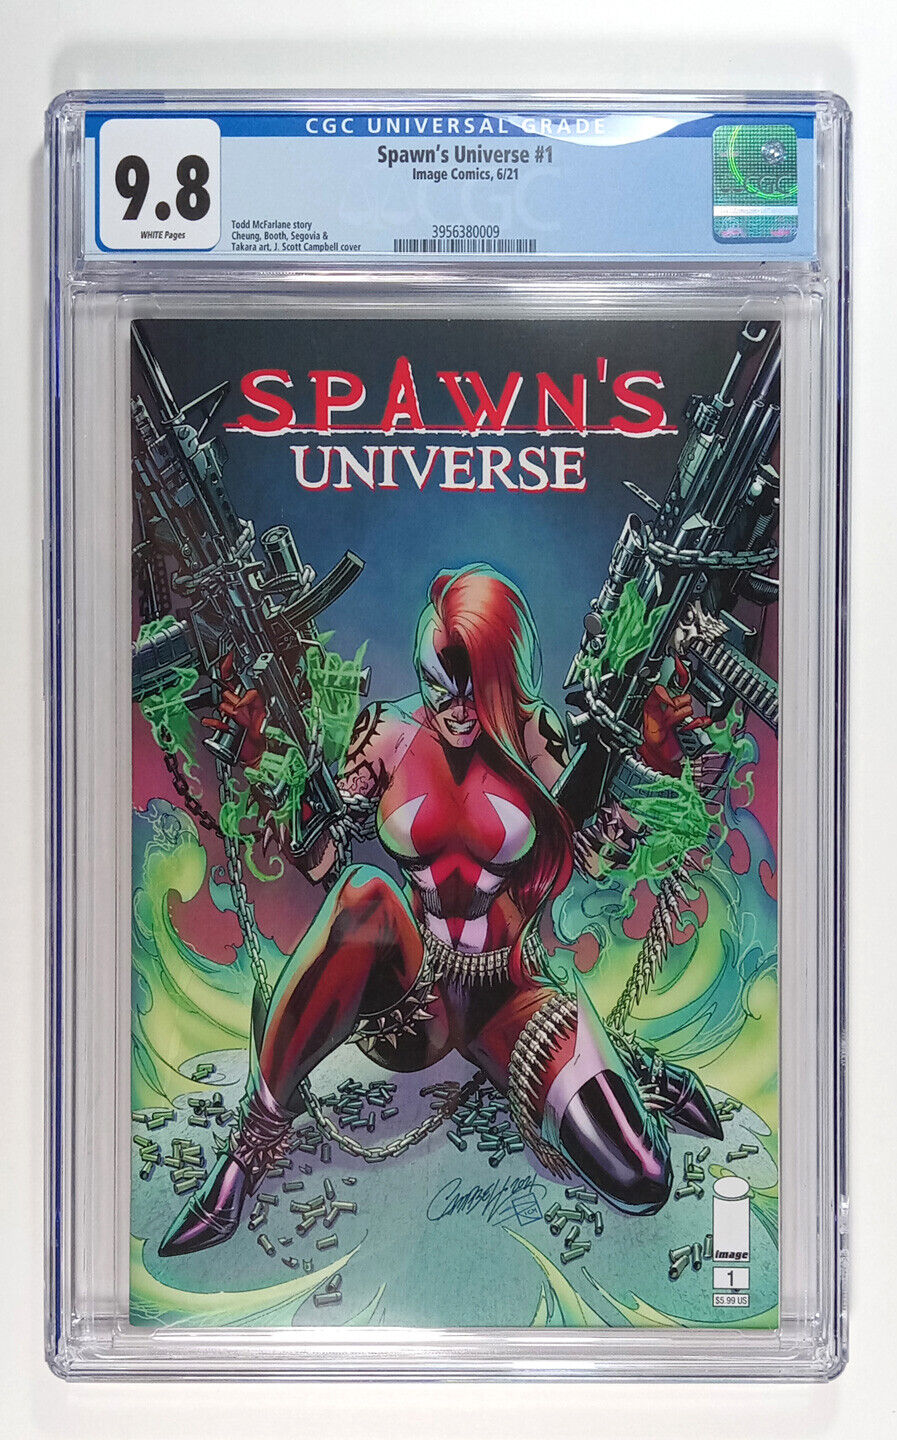 Spawn's Universe #1 CGC 9.8 White Pages (2021) Image Comics  She Spawn